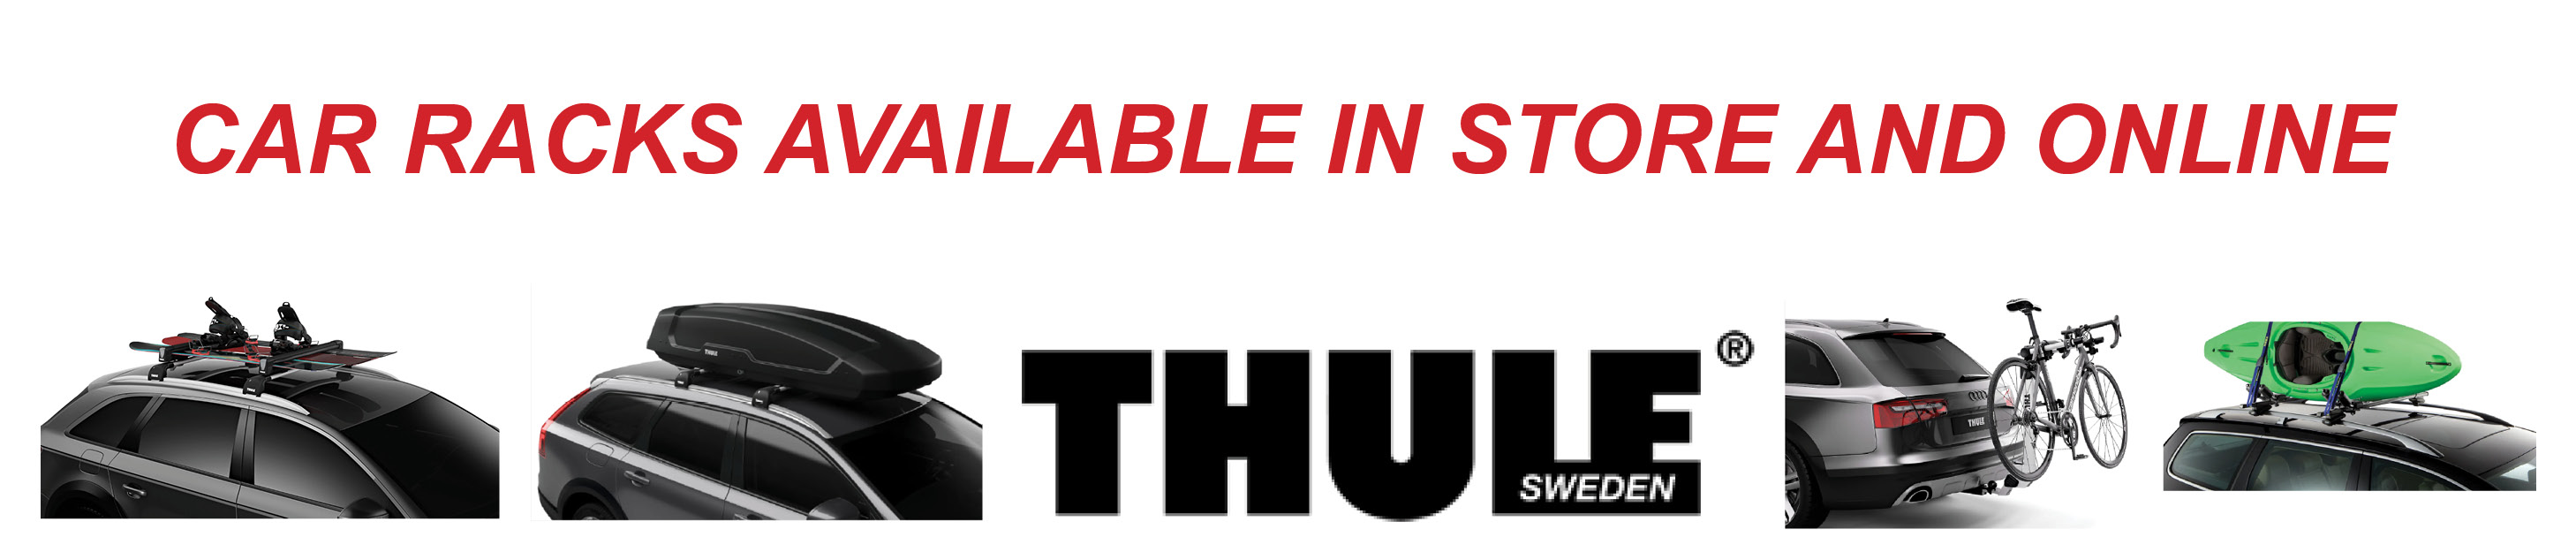 Thule car racks available in store and online